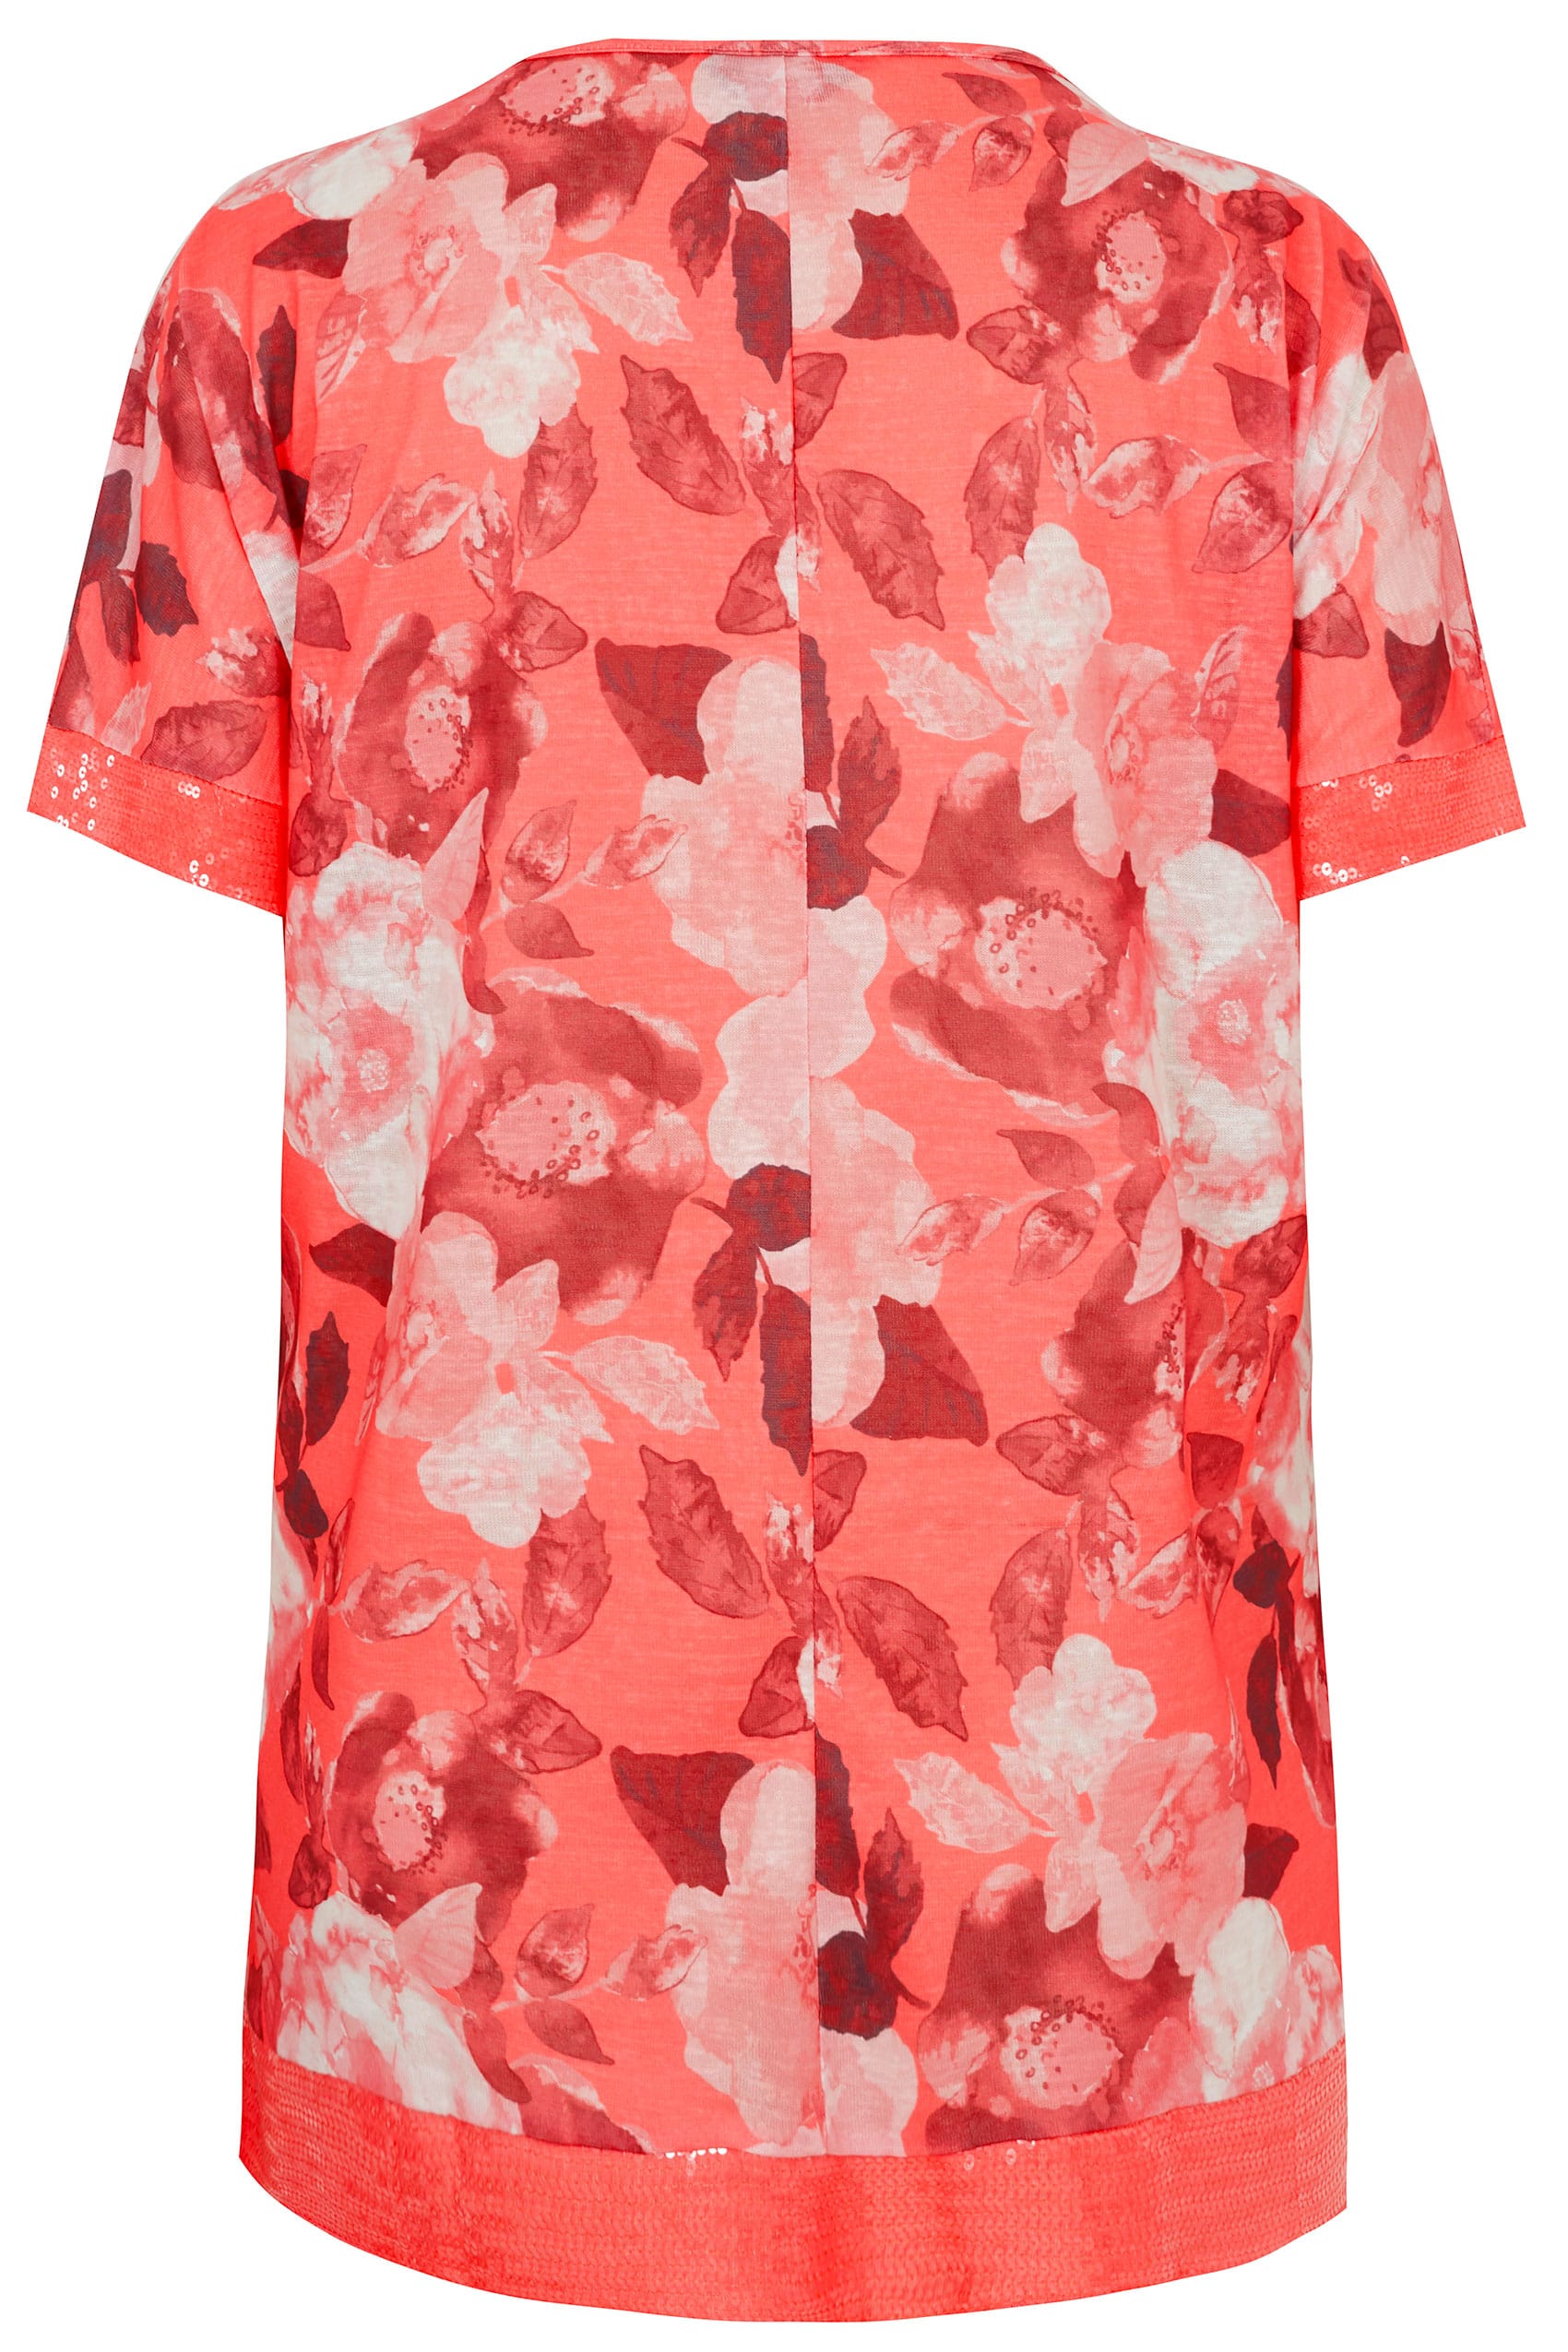 Coral Embellished Watercolour Floral T-Shirt, plus size 16 to 36